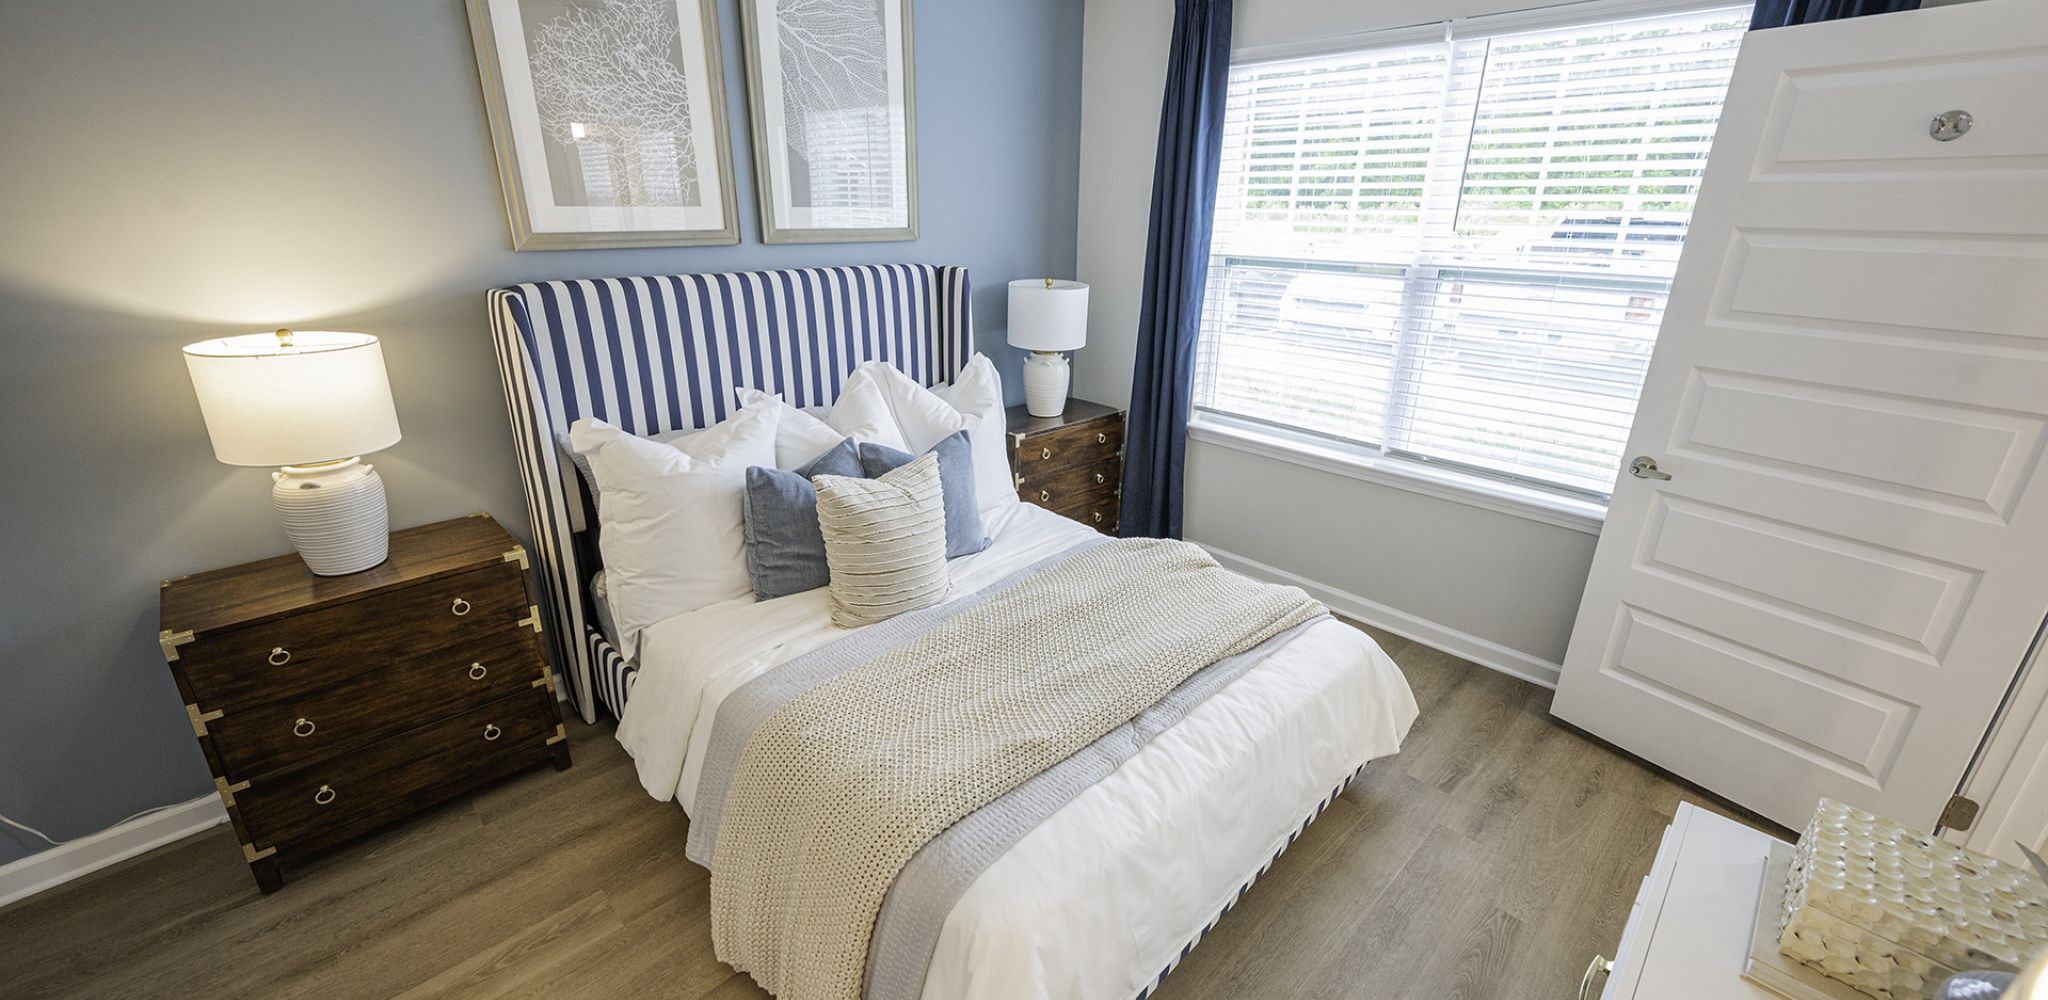 Hawthorne Waterside elegantly furnished bedroom with a striped headboard, chic bedside tables, and framed art above.